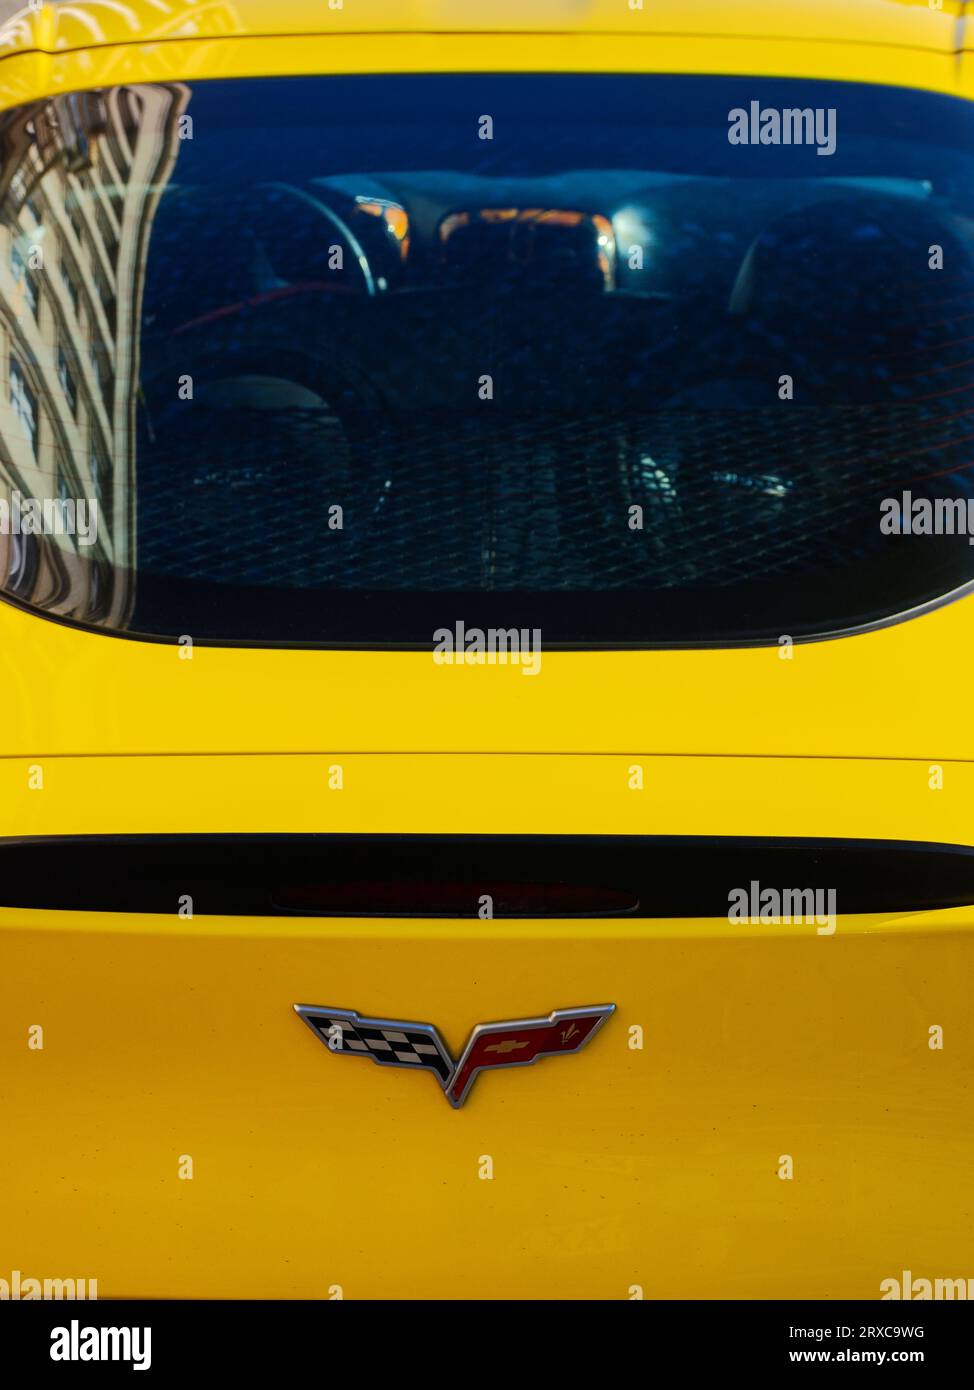 uzhgorod, ukraine - 31 oct 2021: chevrolet corvette logo on a trunk of a yellow sports car. outdoor closeup. old building reflecting in the rear windo Stock Photo